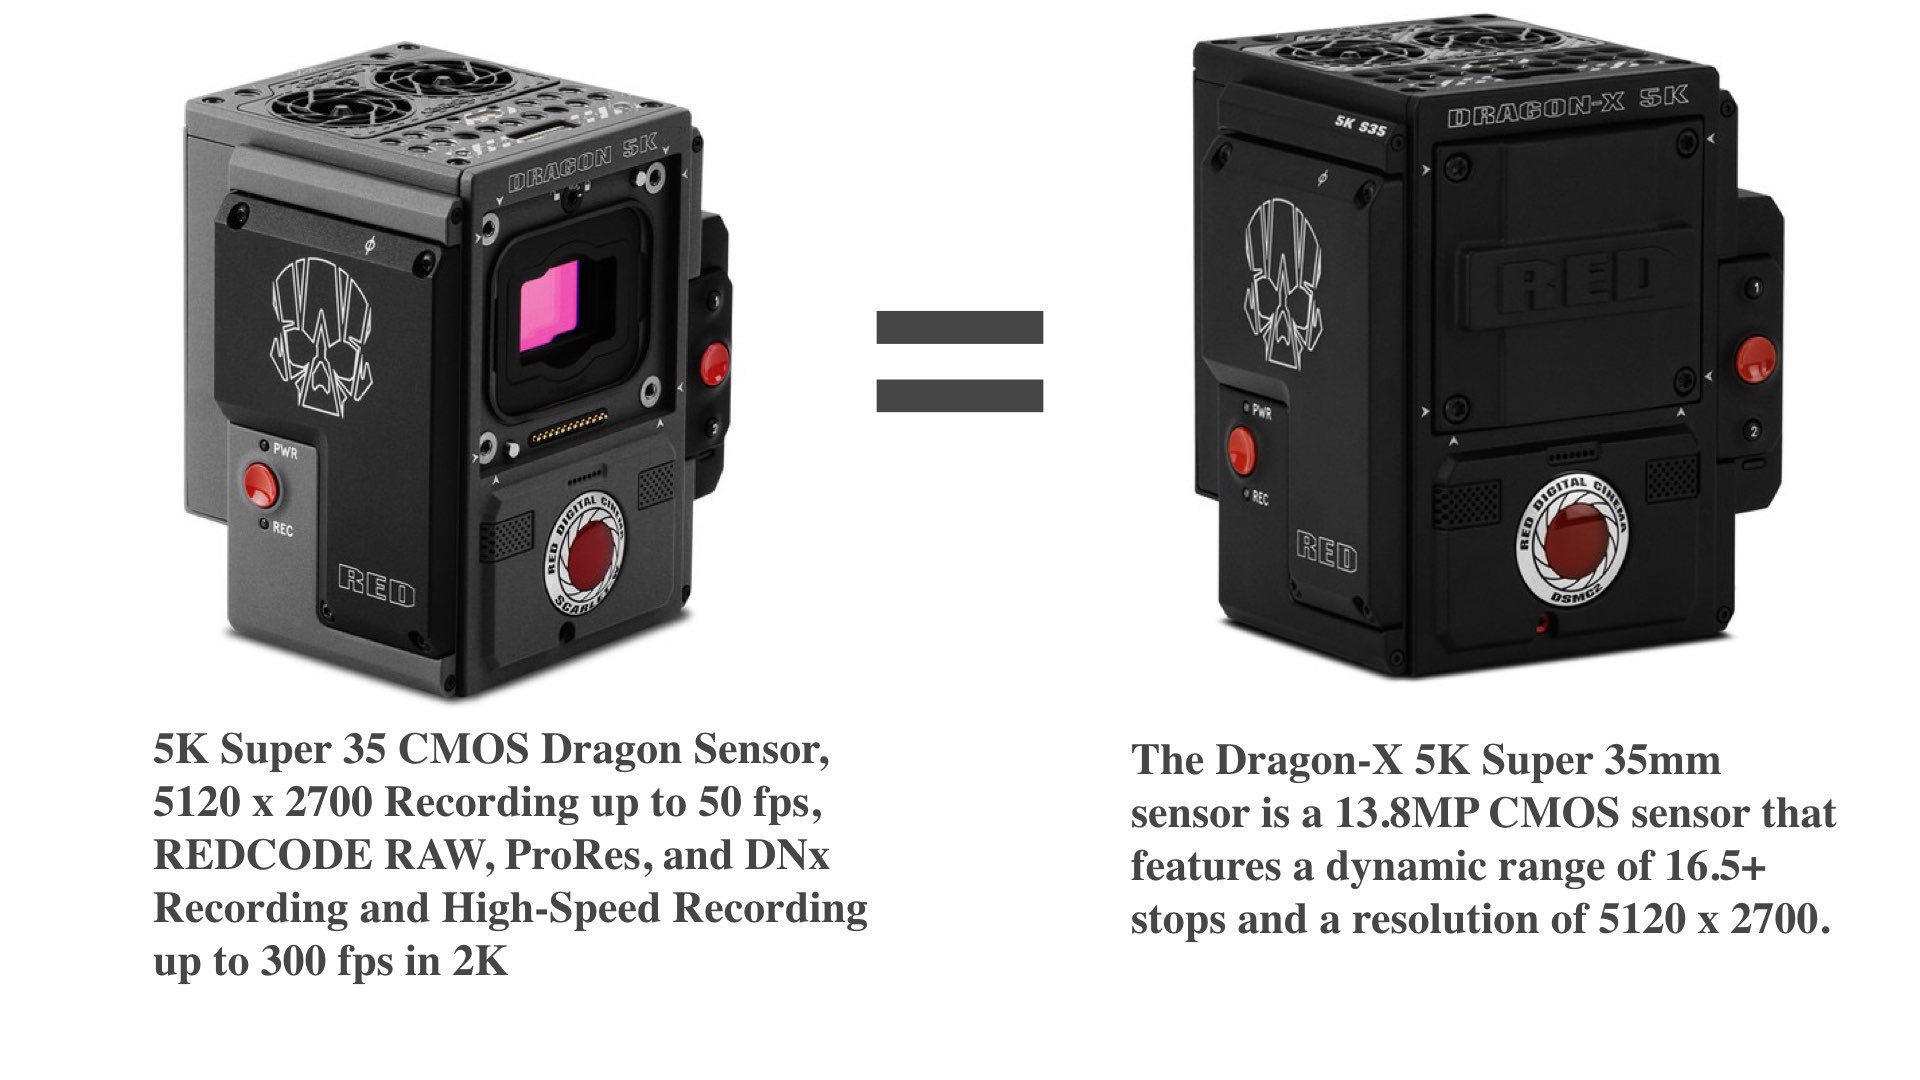 Comparison between Scarlet-W and Dragon-X